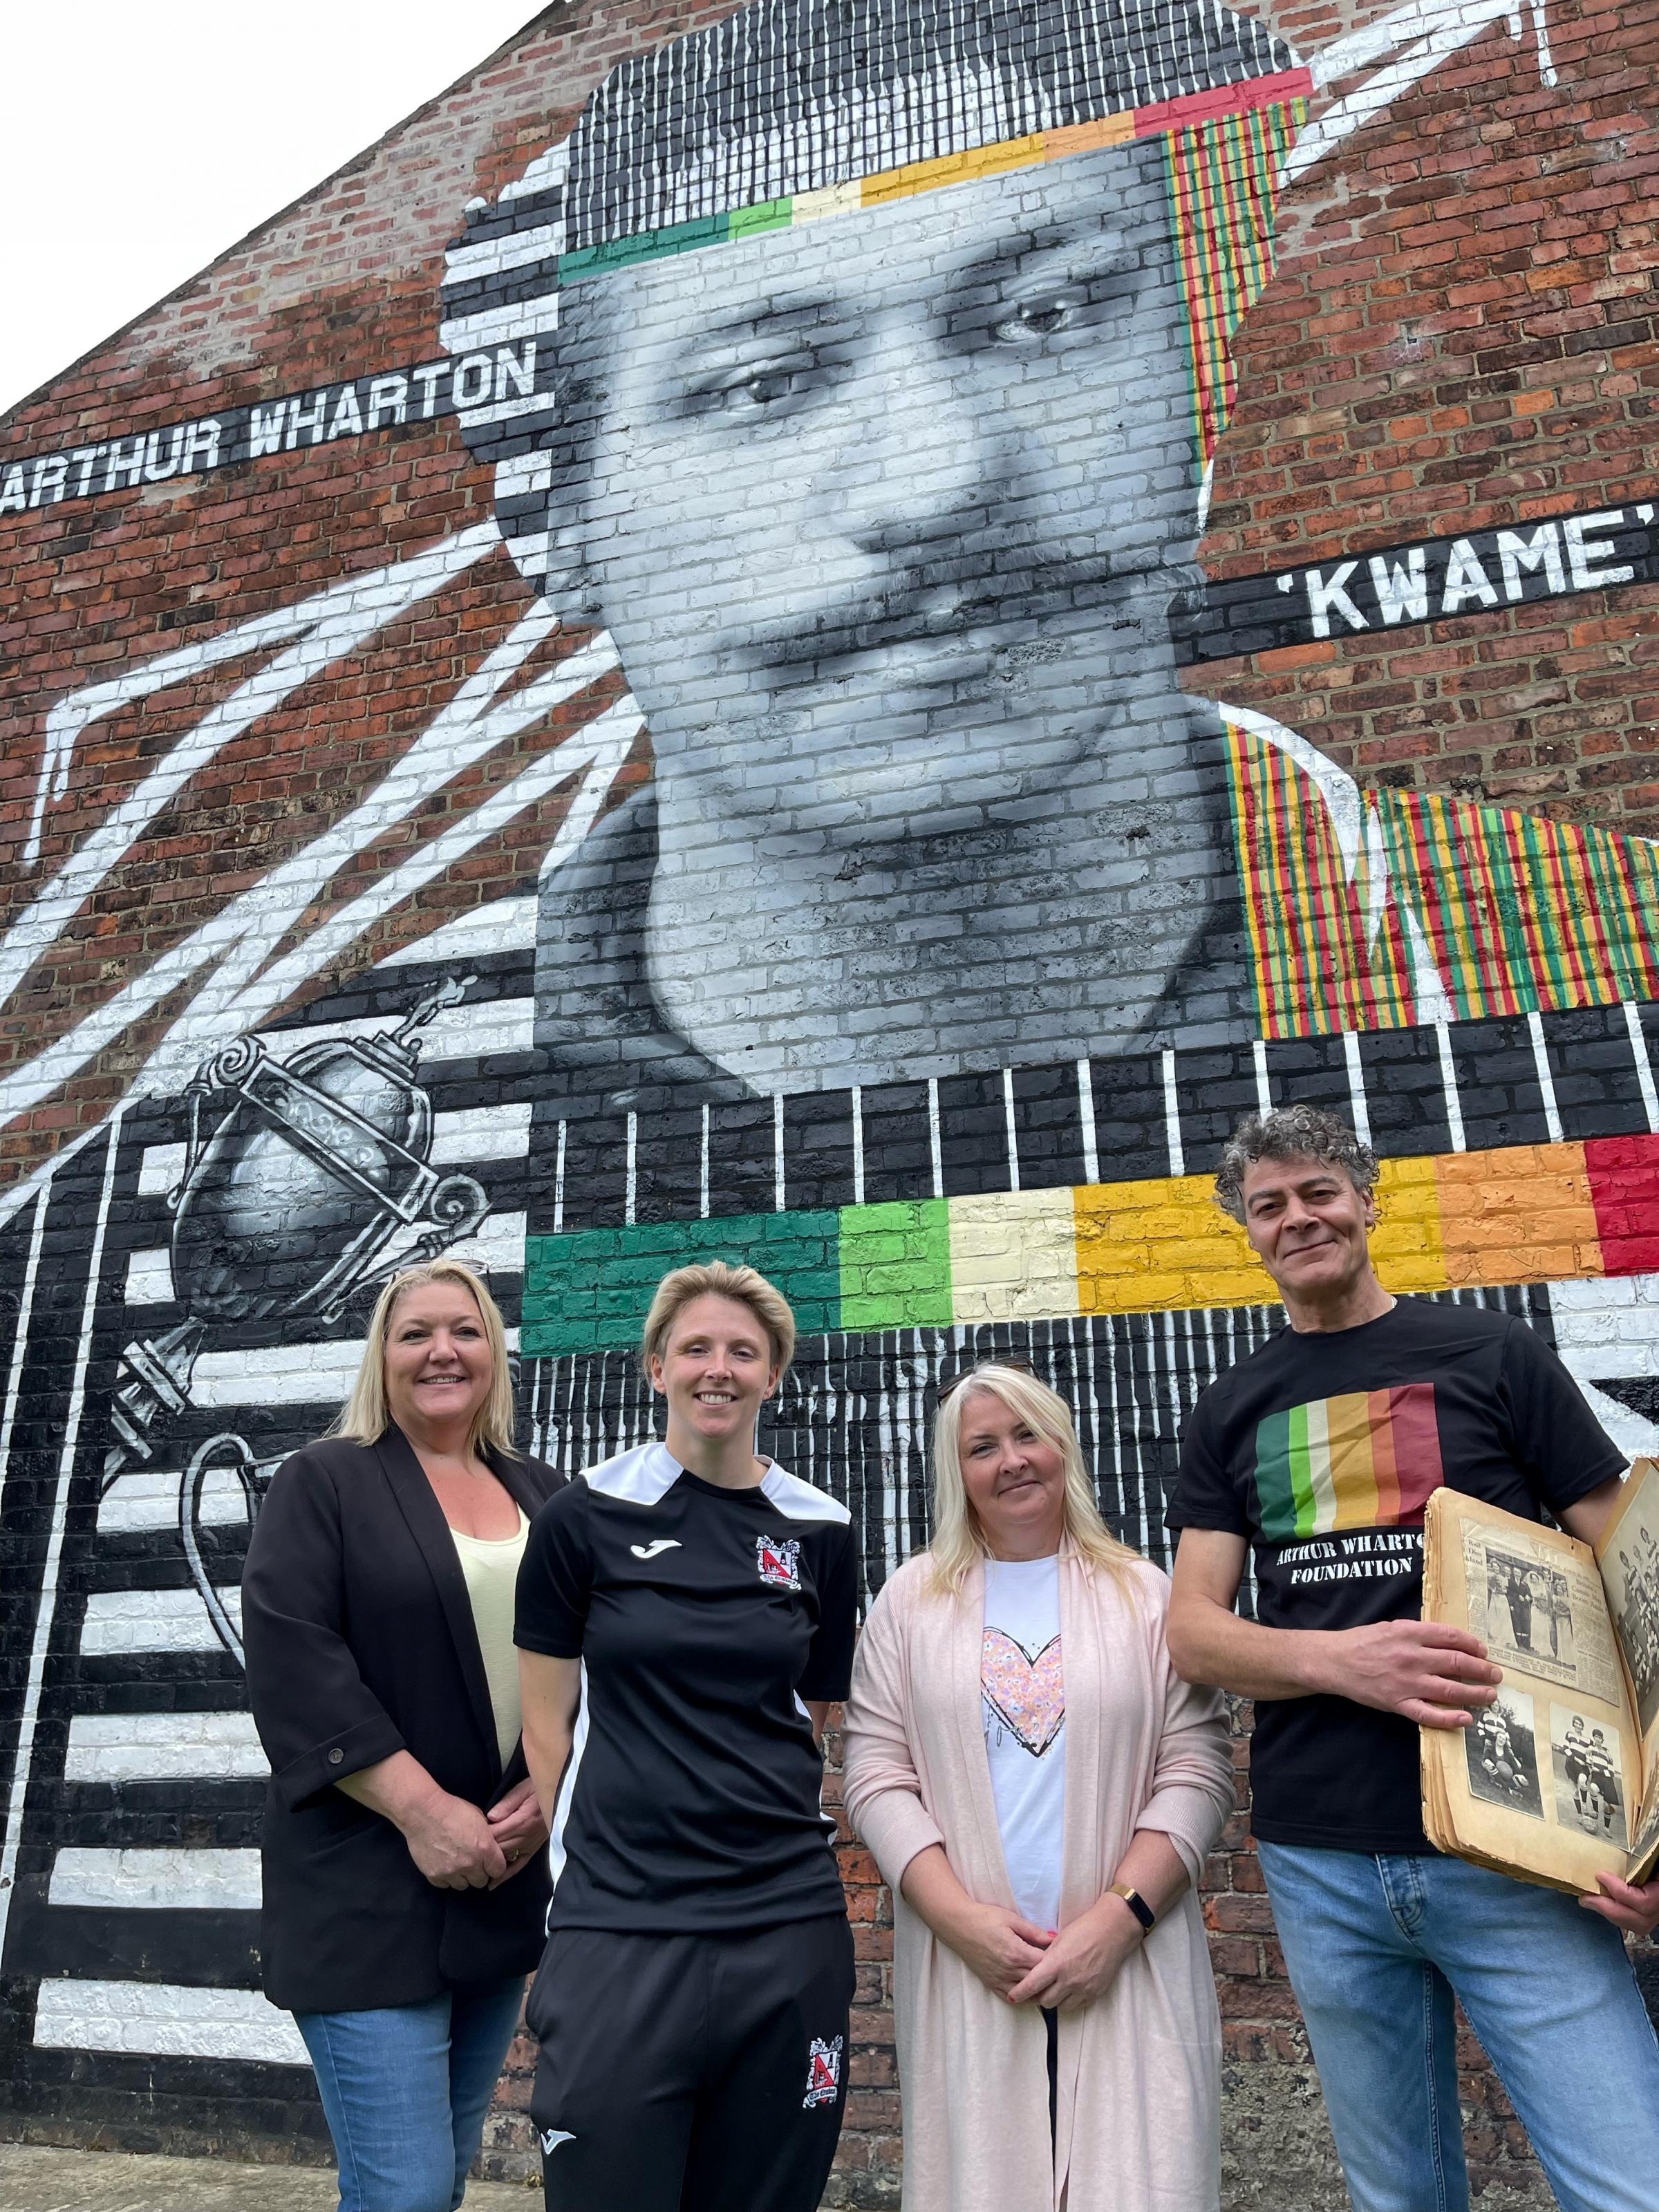 Beverley Avery, left, and her sister Gail Henderson, with Toni Upton, the current Darlington Ladies captain, and Shaun Campbell from the Arthur Wharton Foundation in front of the mural of Arthur in Widdowfield Street, Darlington